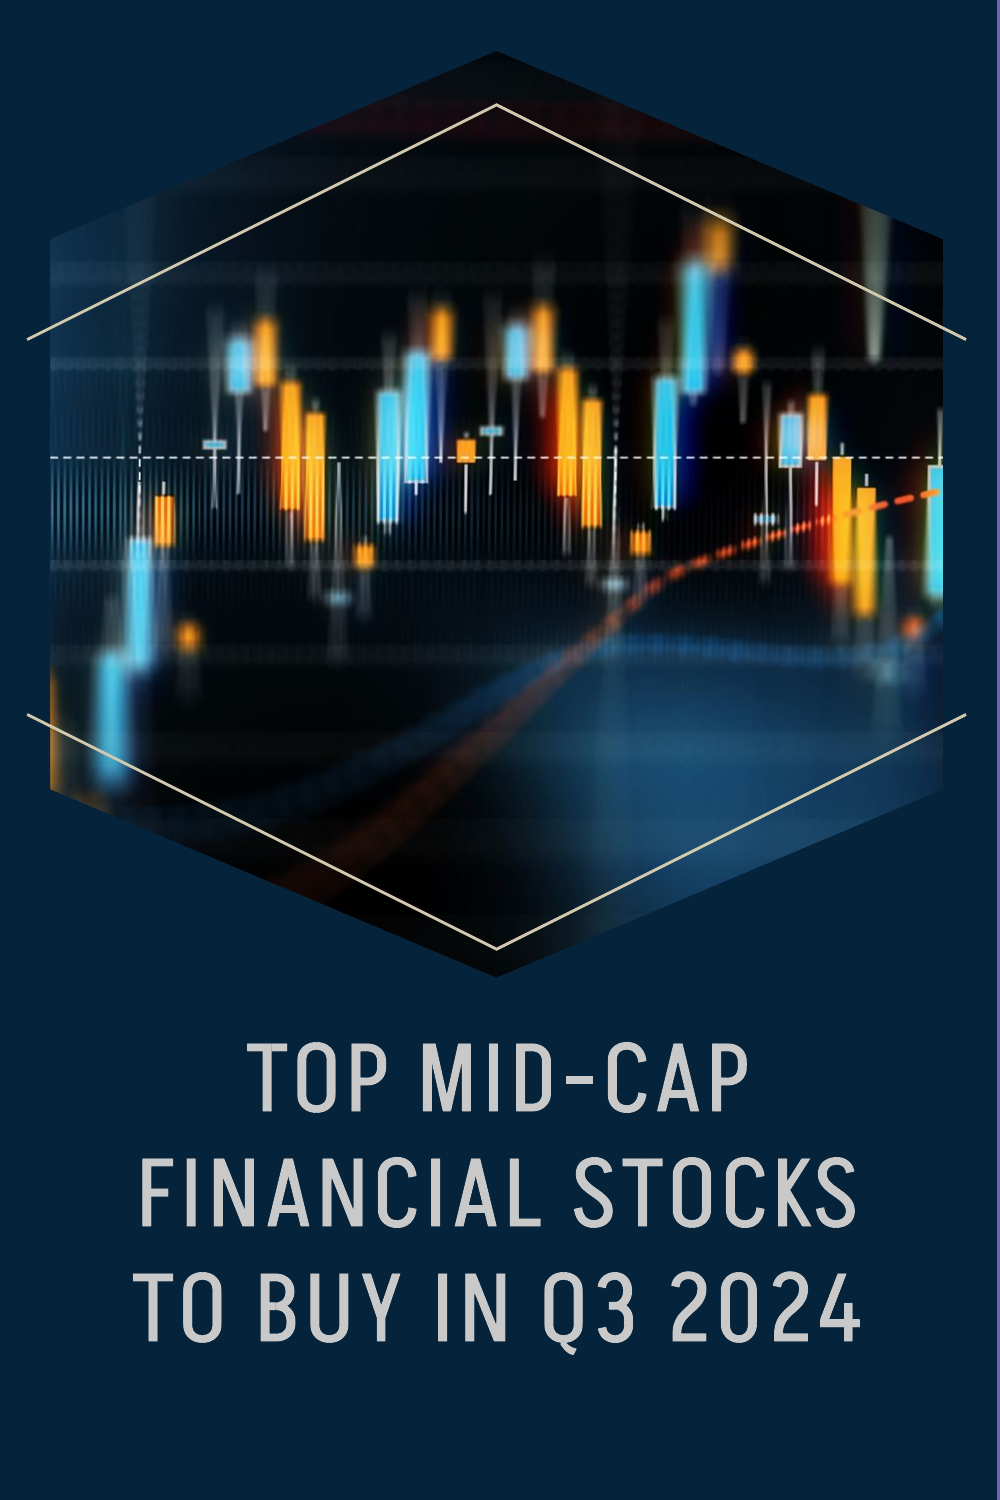 Best mid-cap financial stocks to invest in Q3 2024